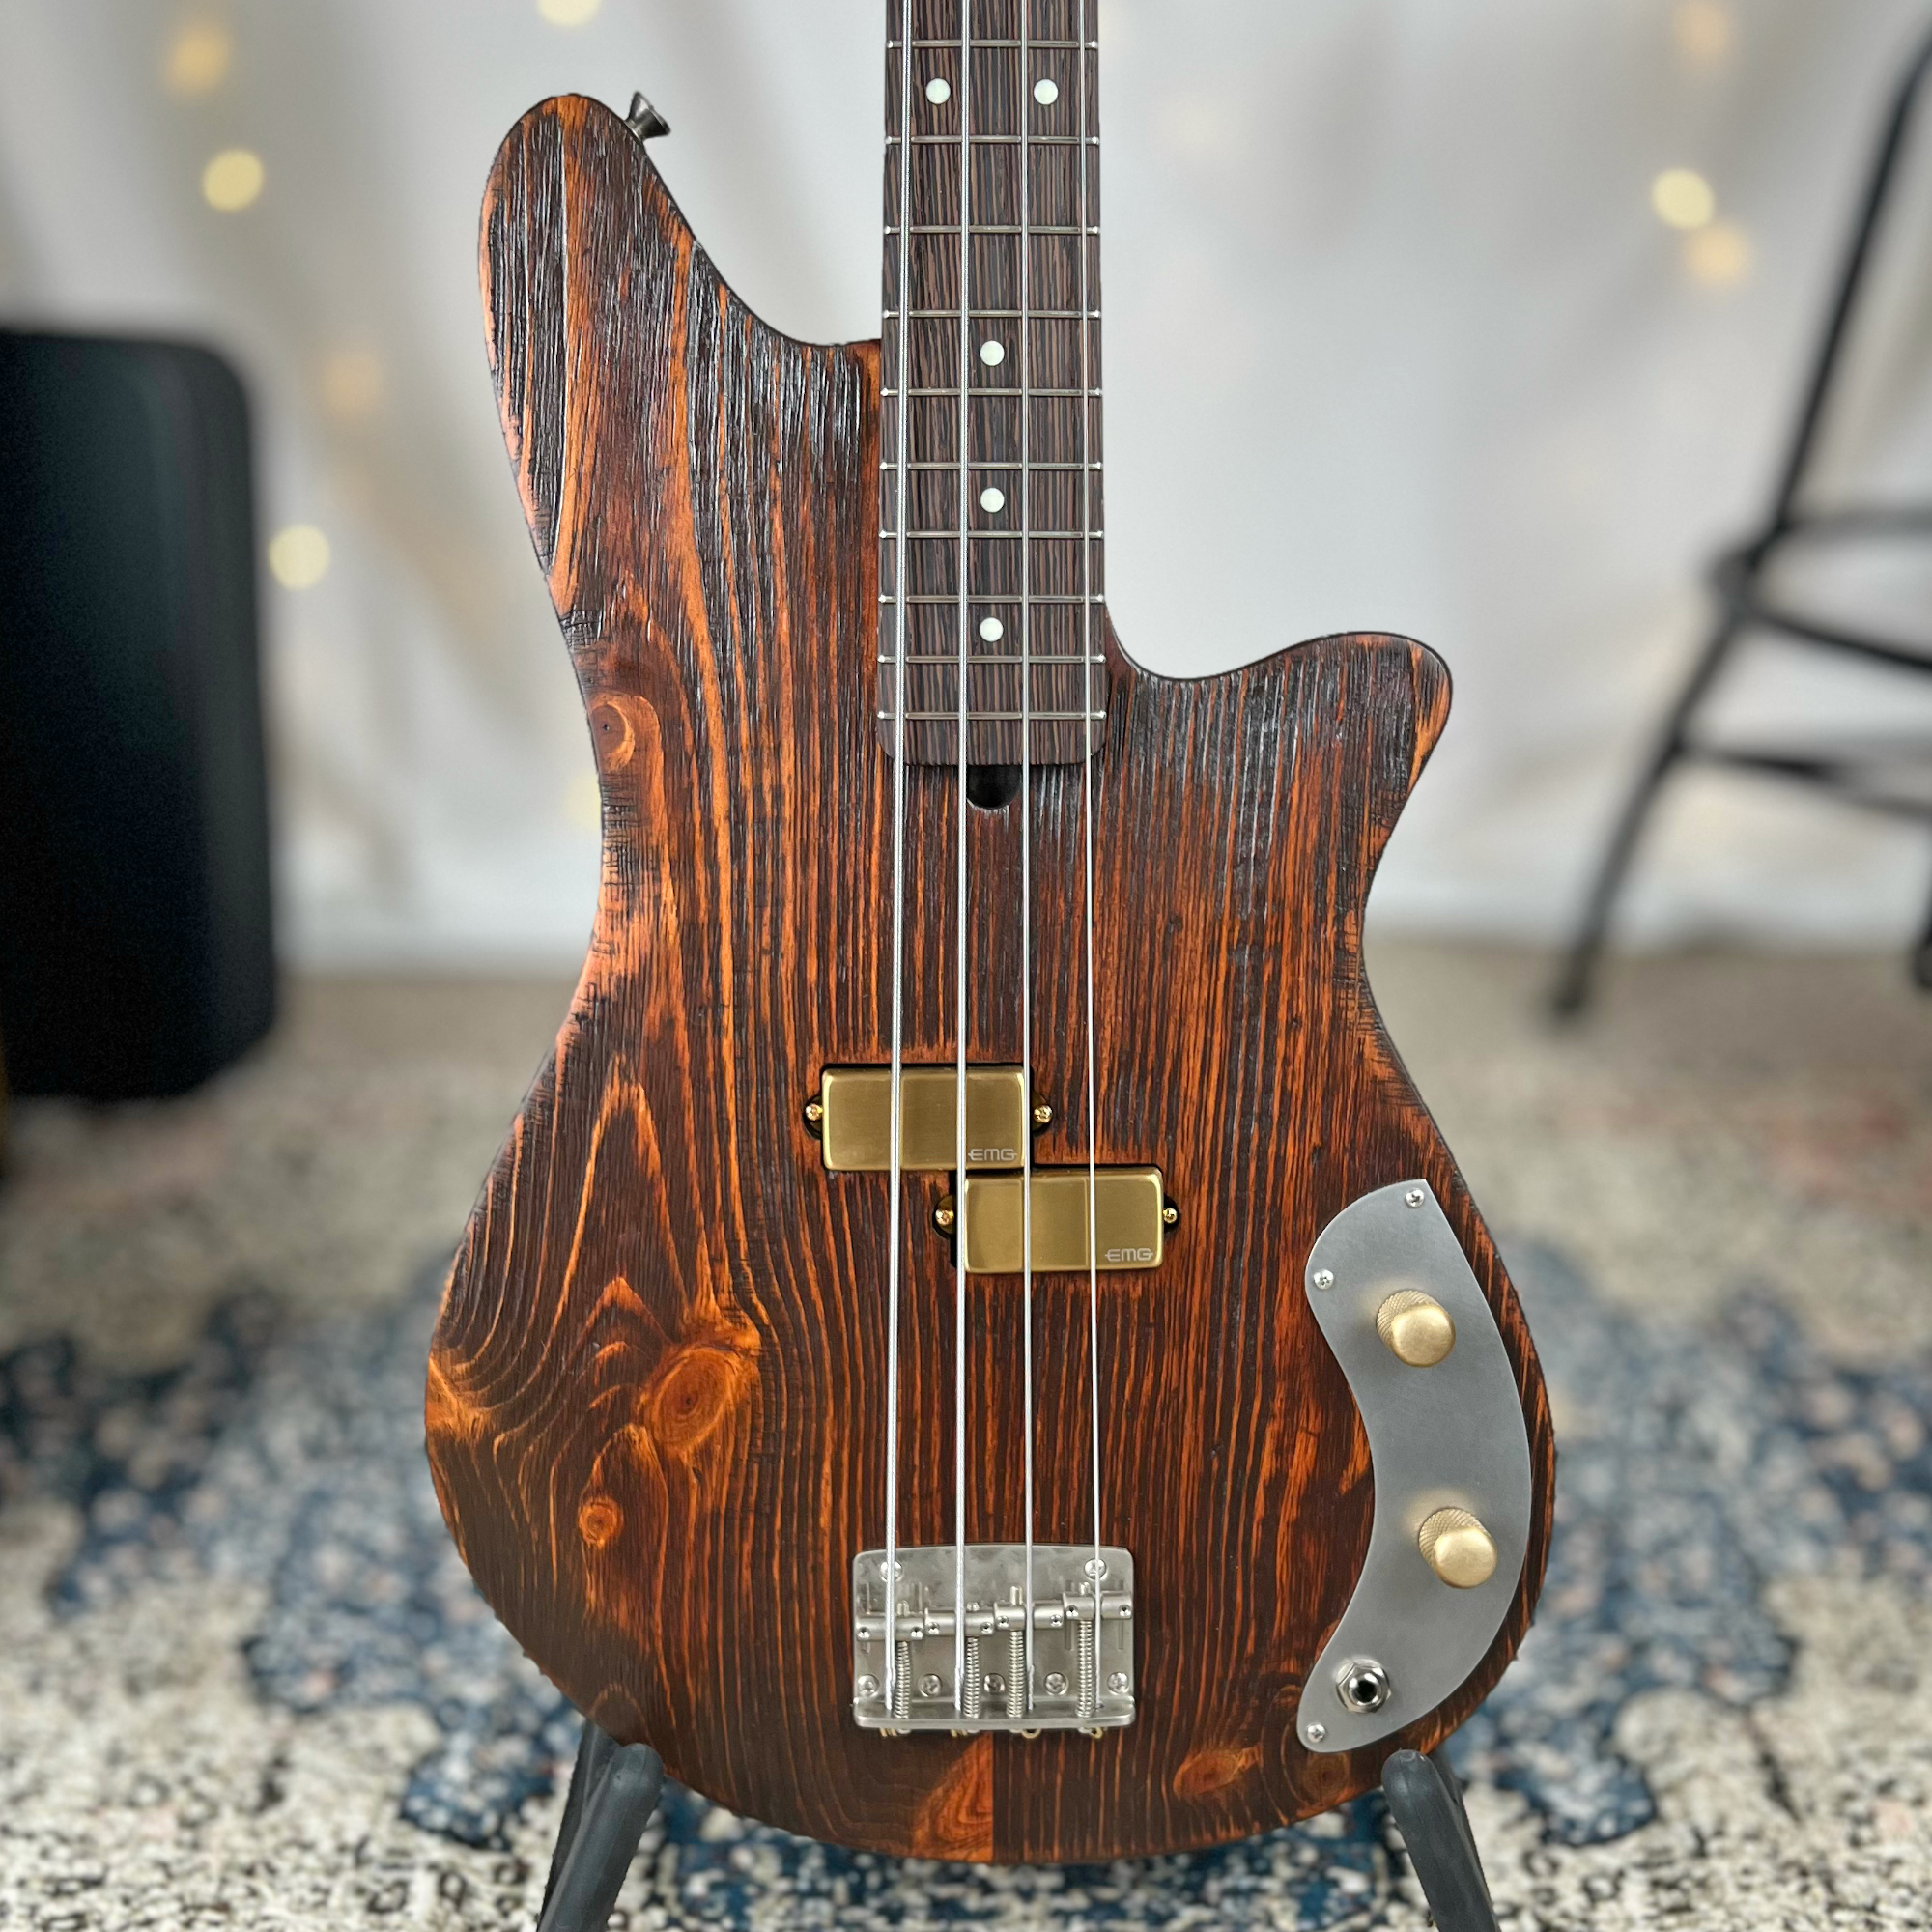 Shelby P 30" Short-Scale Bass in Cinnamon on Distressed Pine with EMG Les Claypool P Pickup